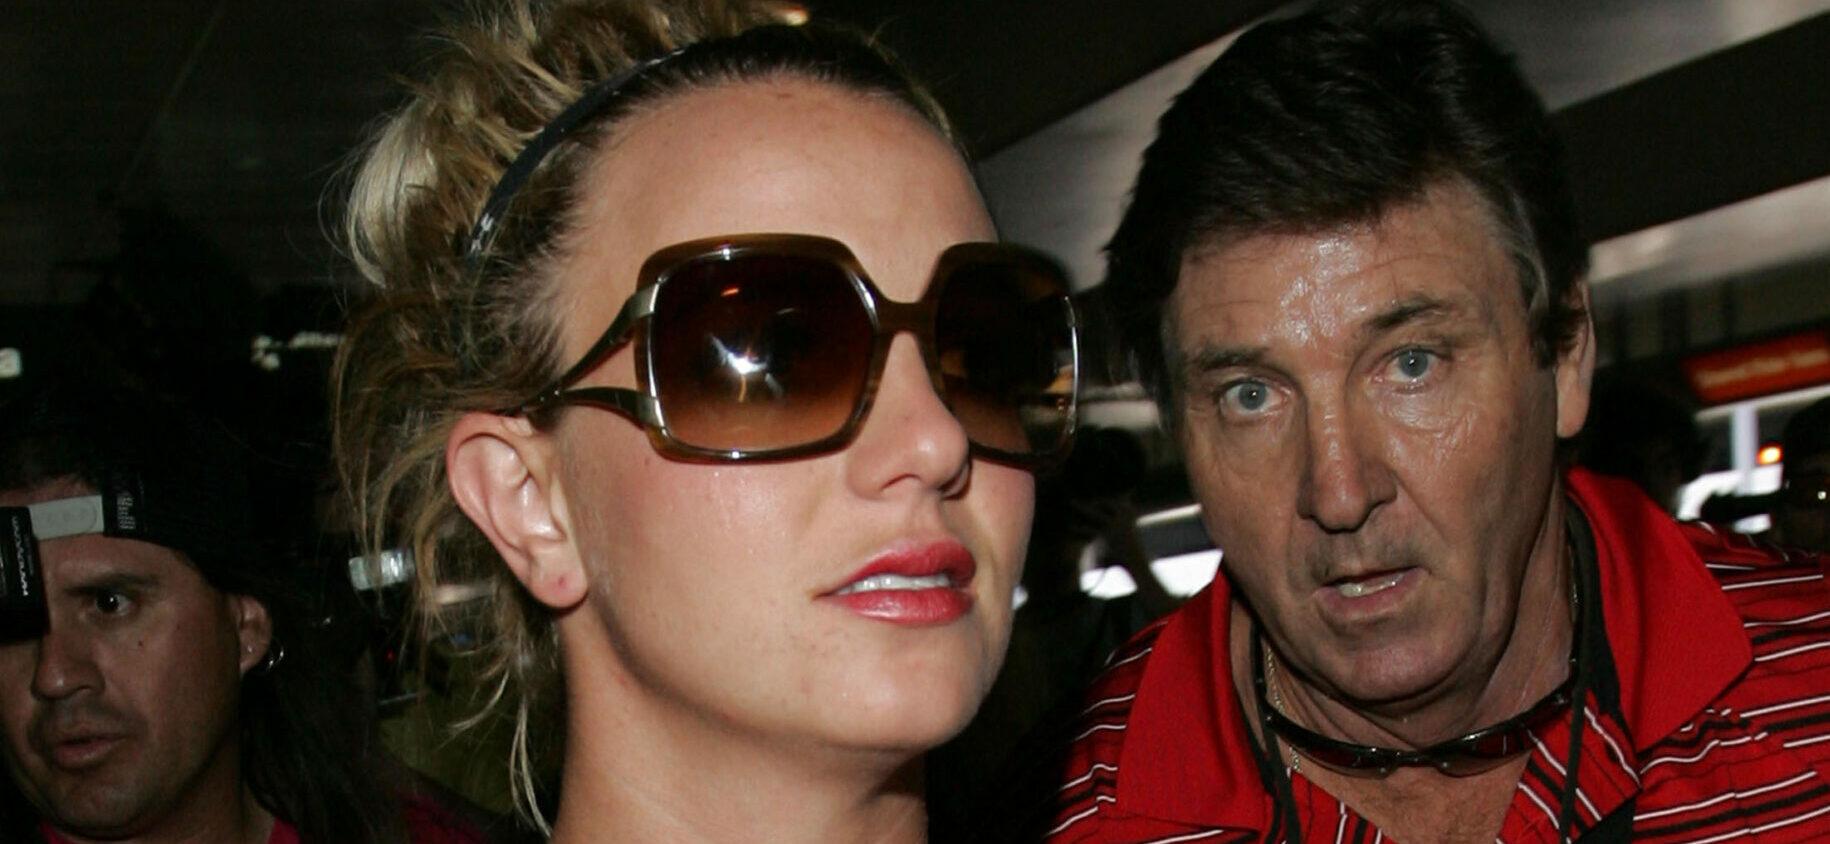 Britney Spears’ Lawyer Claims Her Father Secretly Recorded In Her Private Bedroom